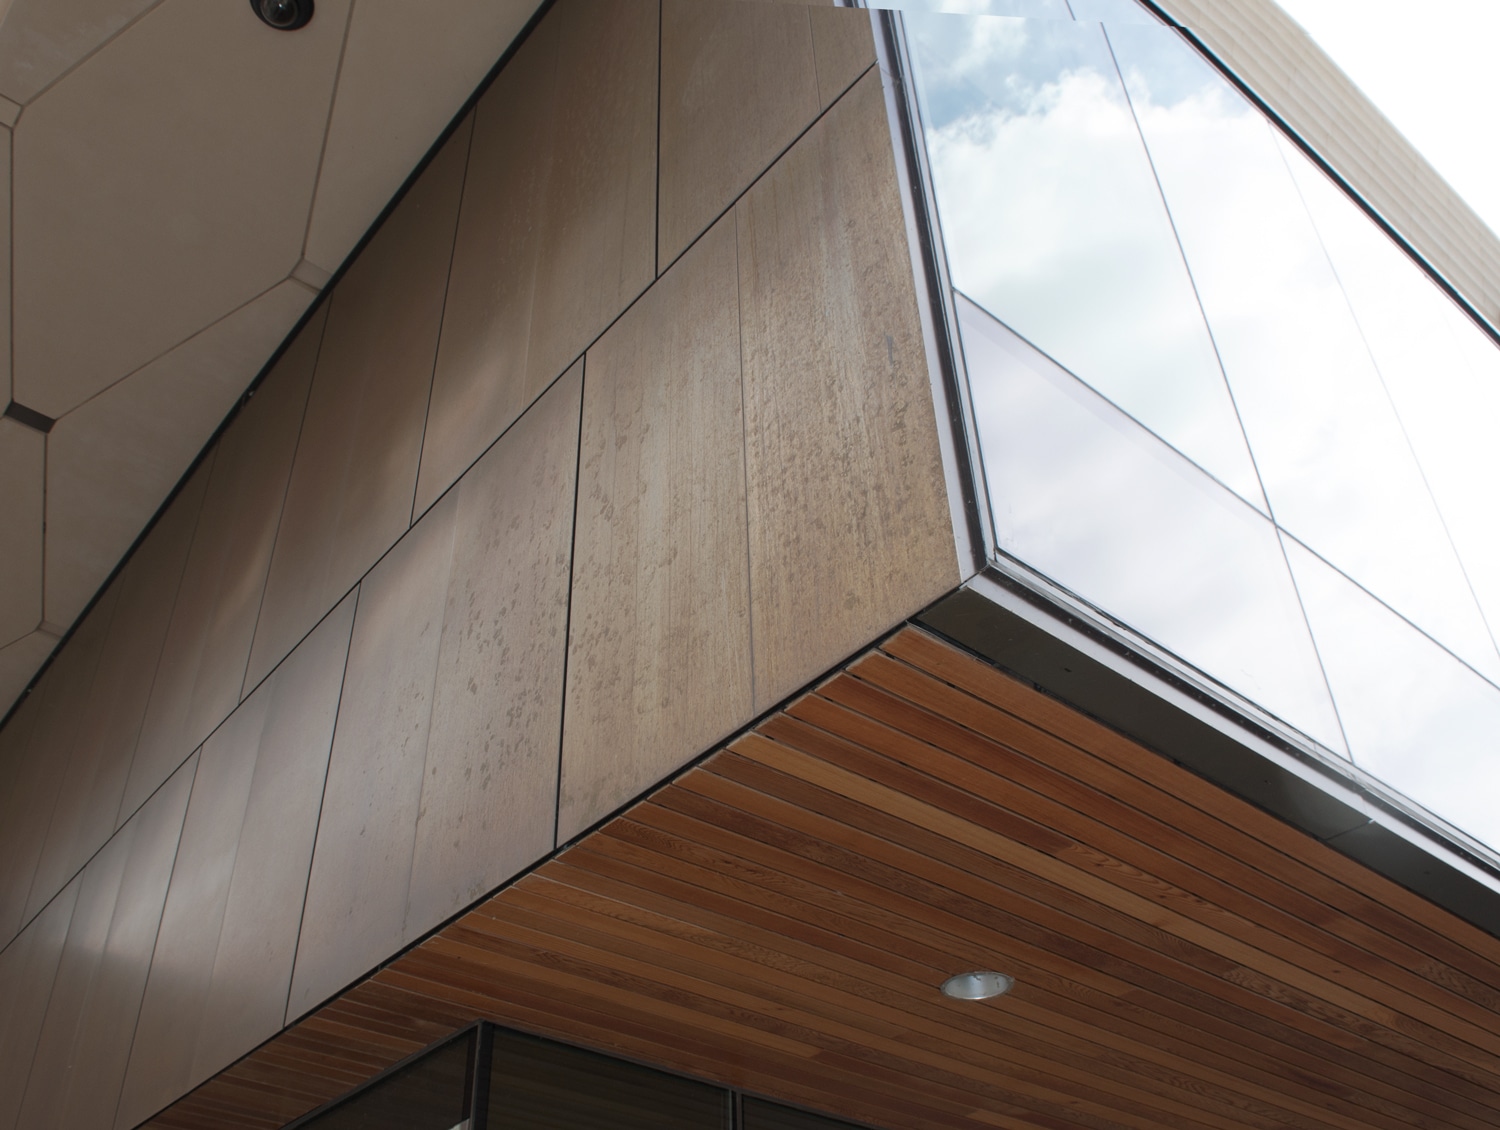 Detail image of exterior facade at Chazen Museum of Art shows patined bronze surface. Architectural system by Riverside Group.